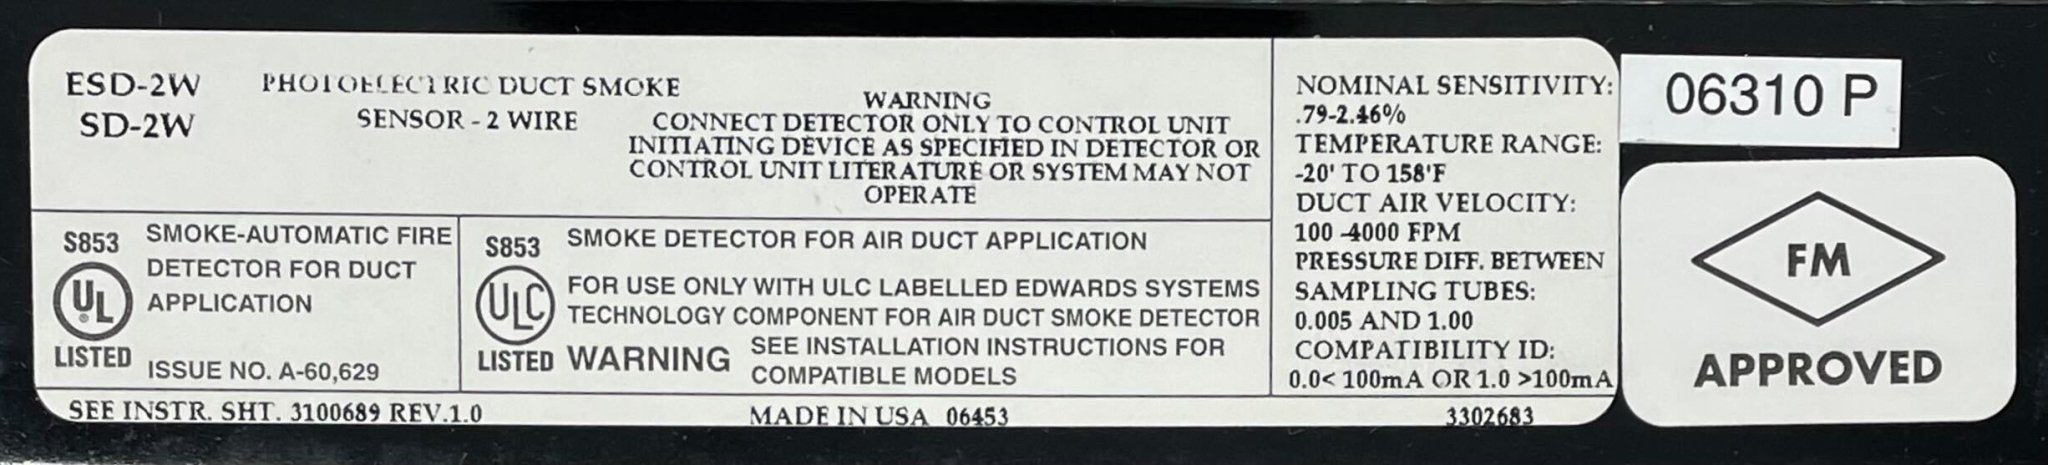 Edwards SD-2W - The Fire Alarm Supplier